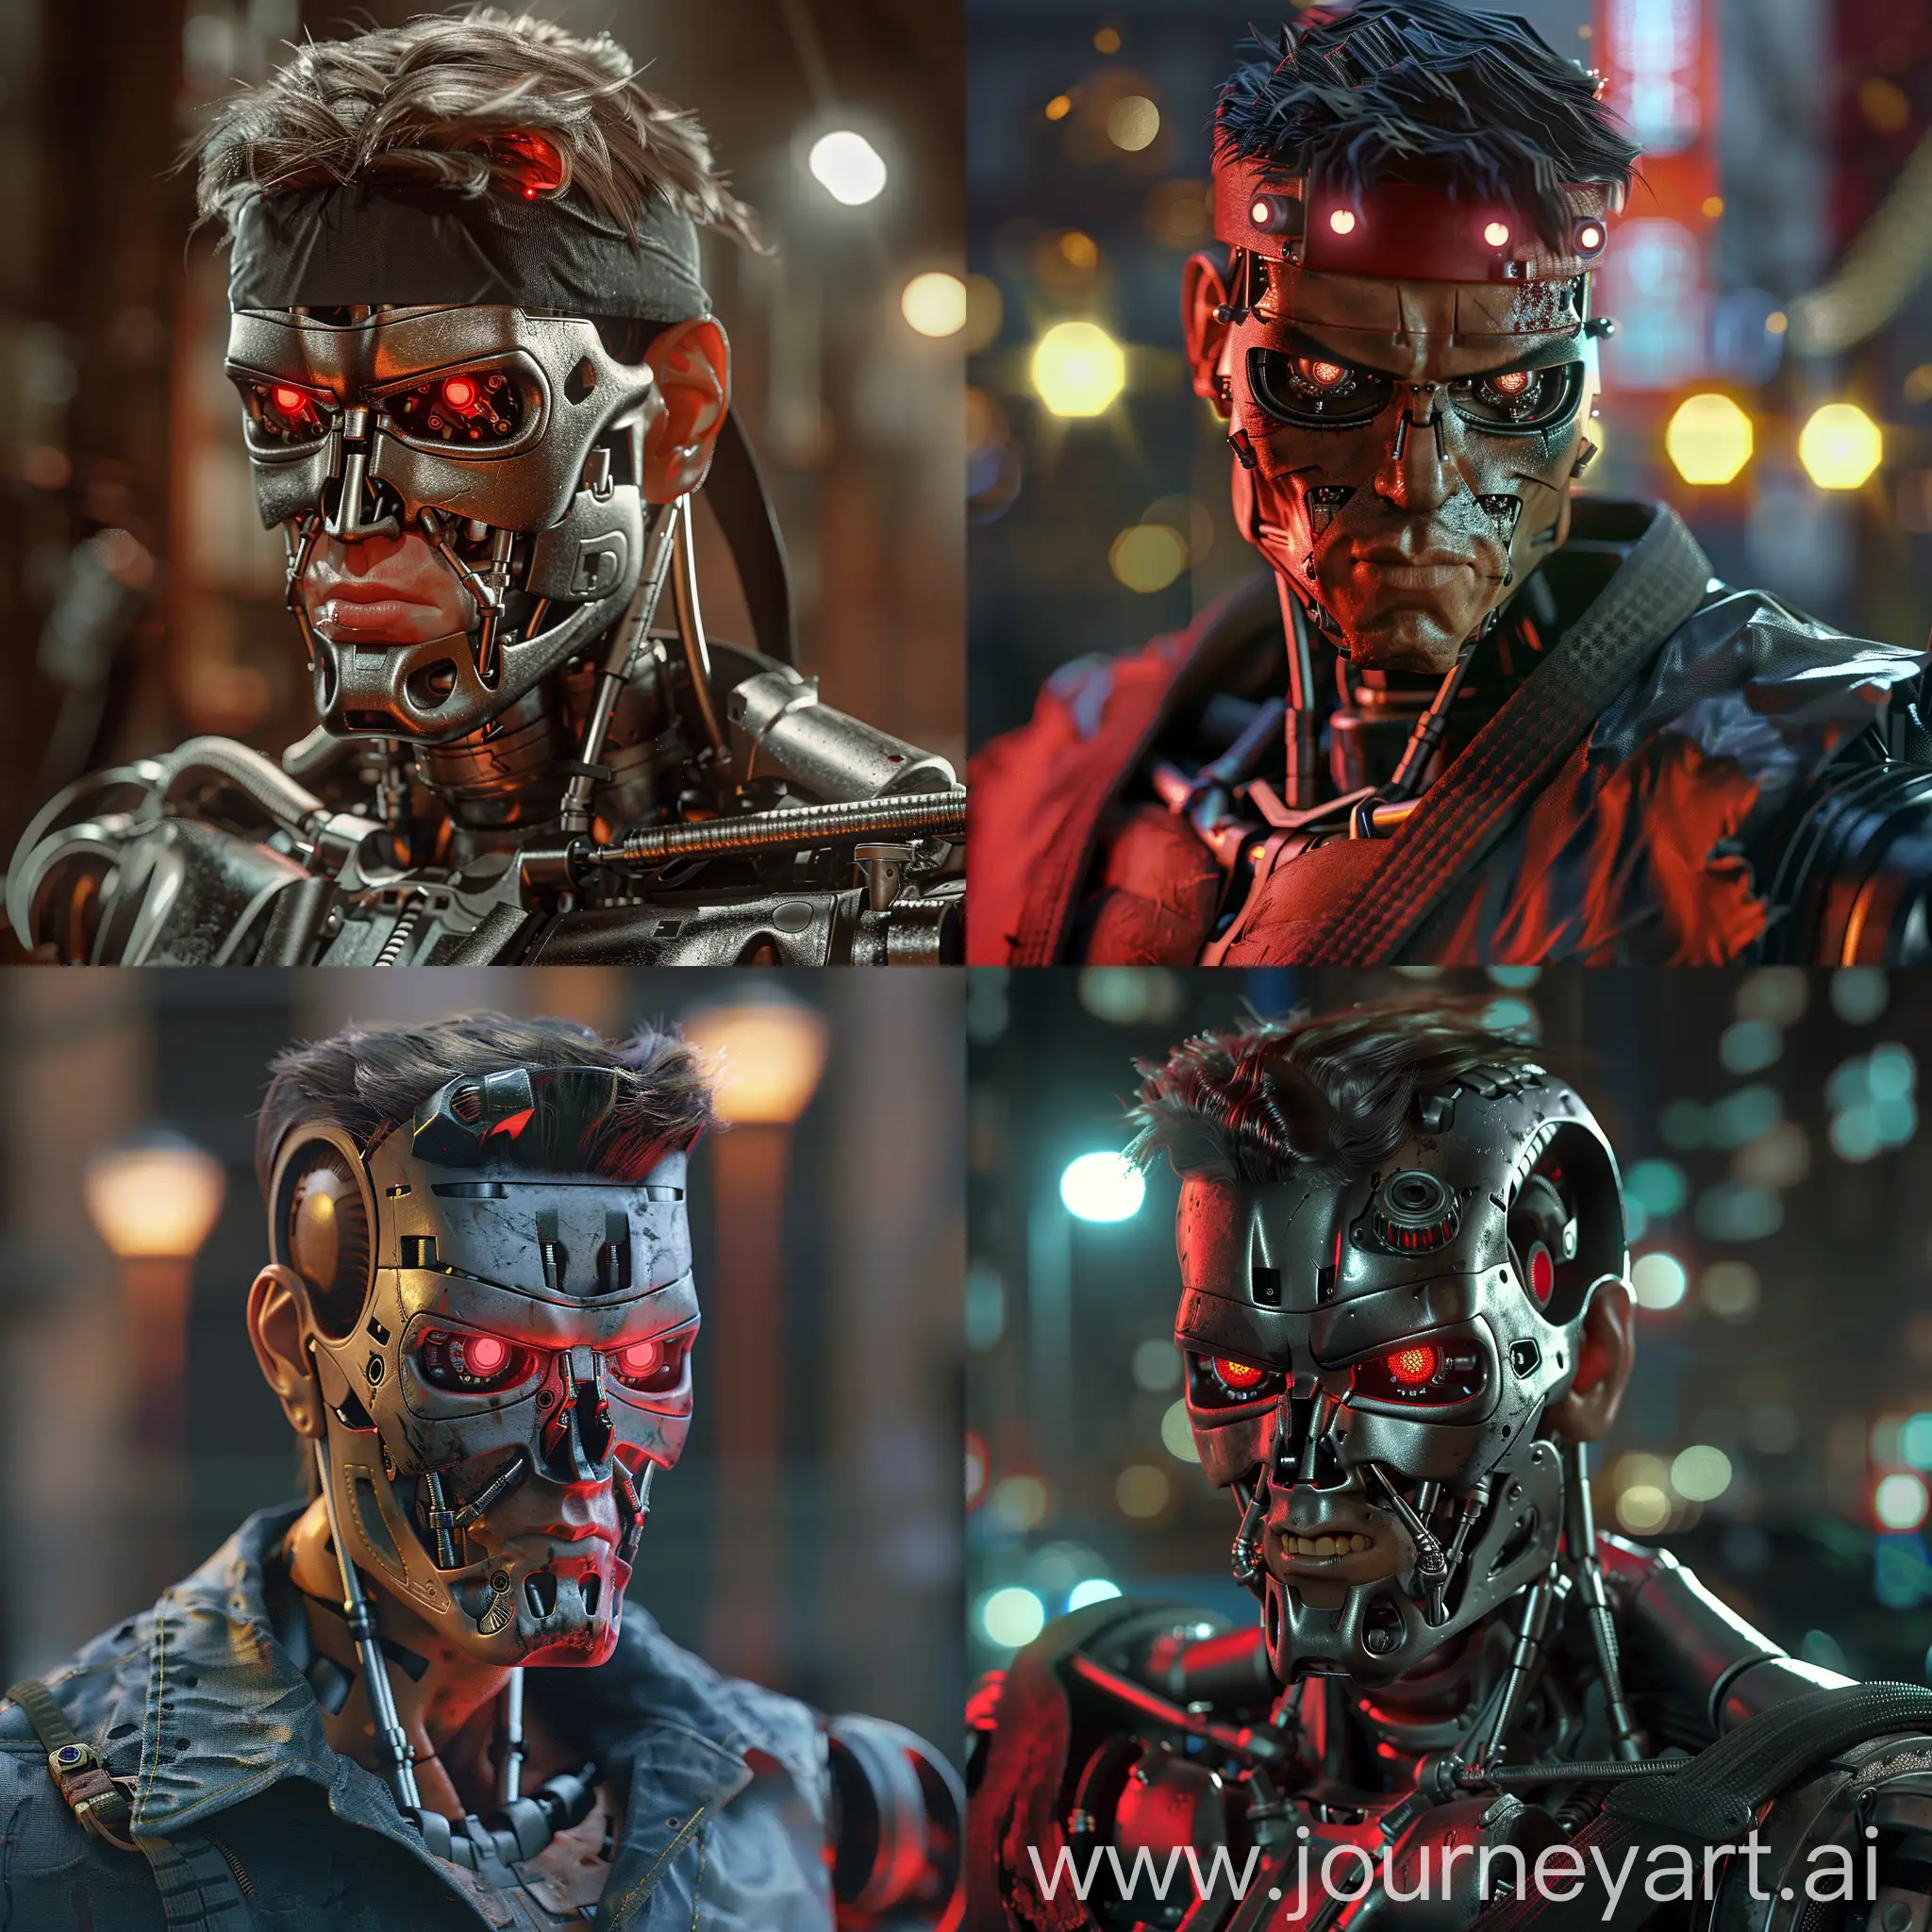 Cinematic-Street-Fighter-Ryu-Transformed-into-T800-Terminator-with-Photorealistic-Lighting